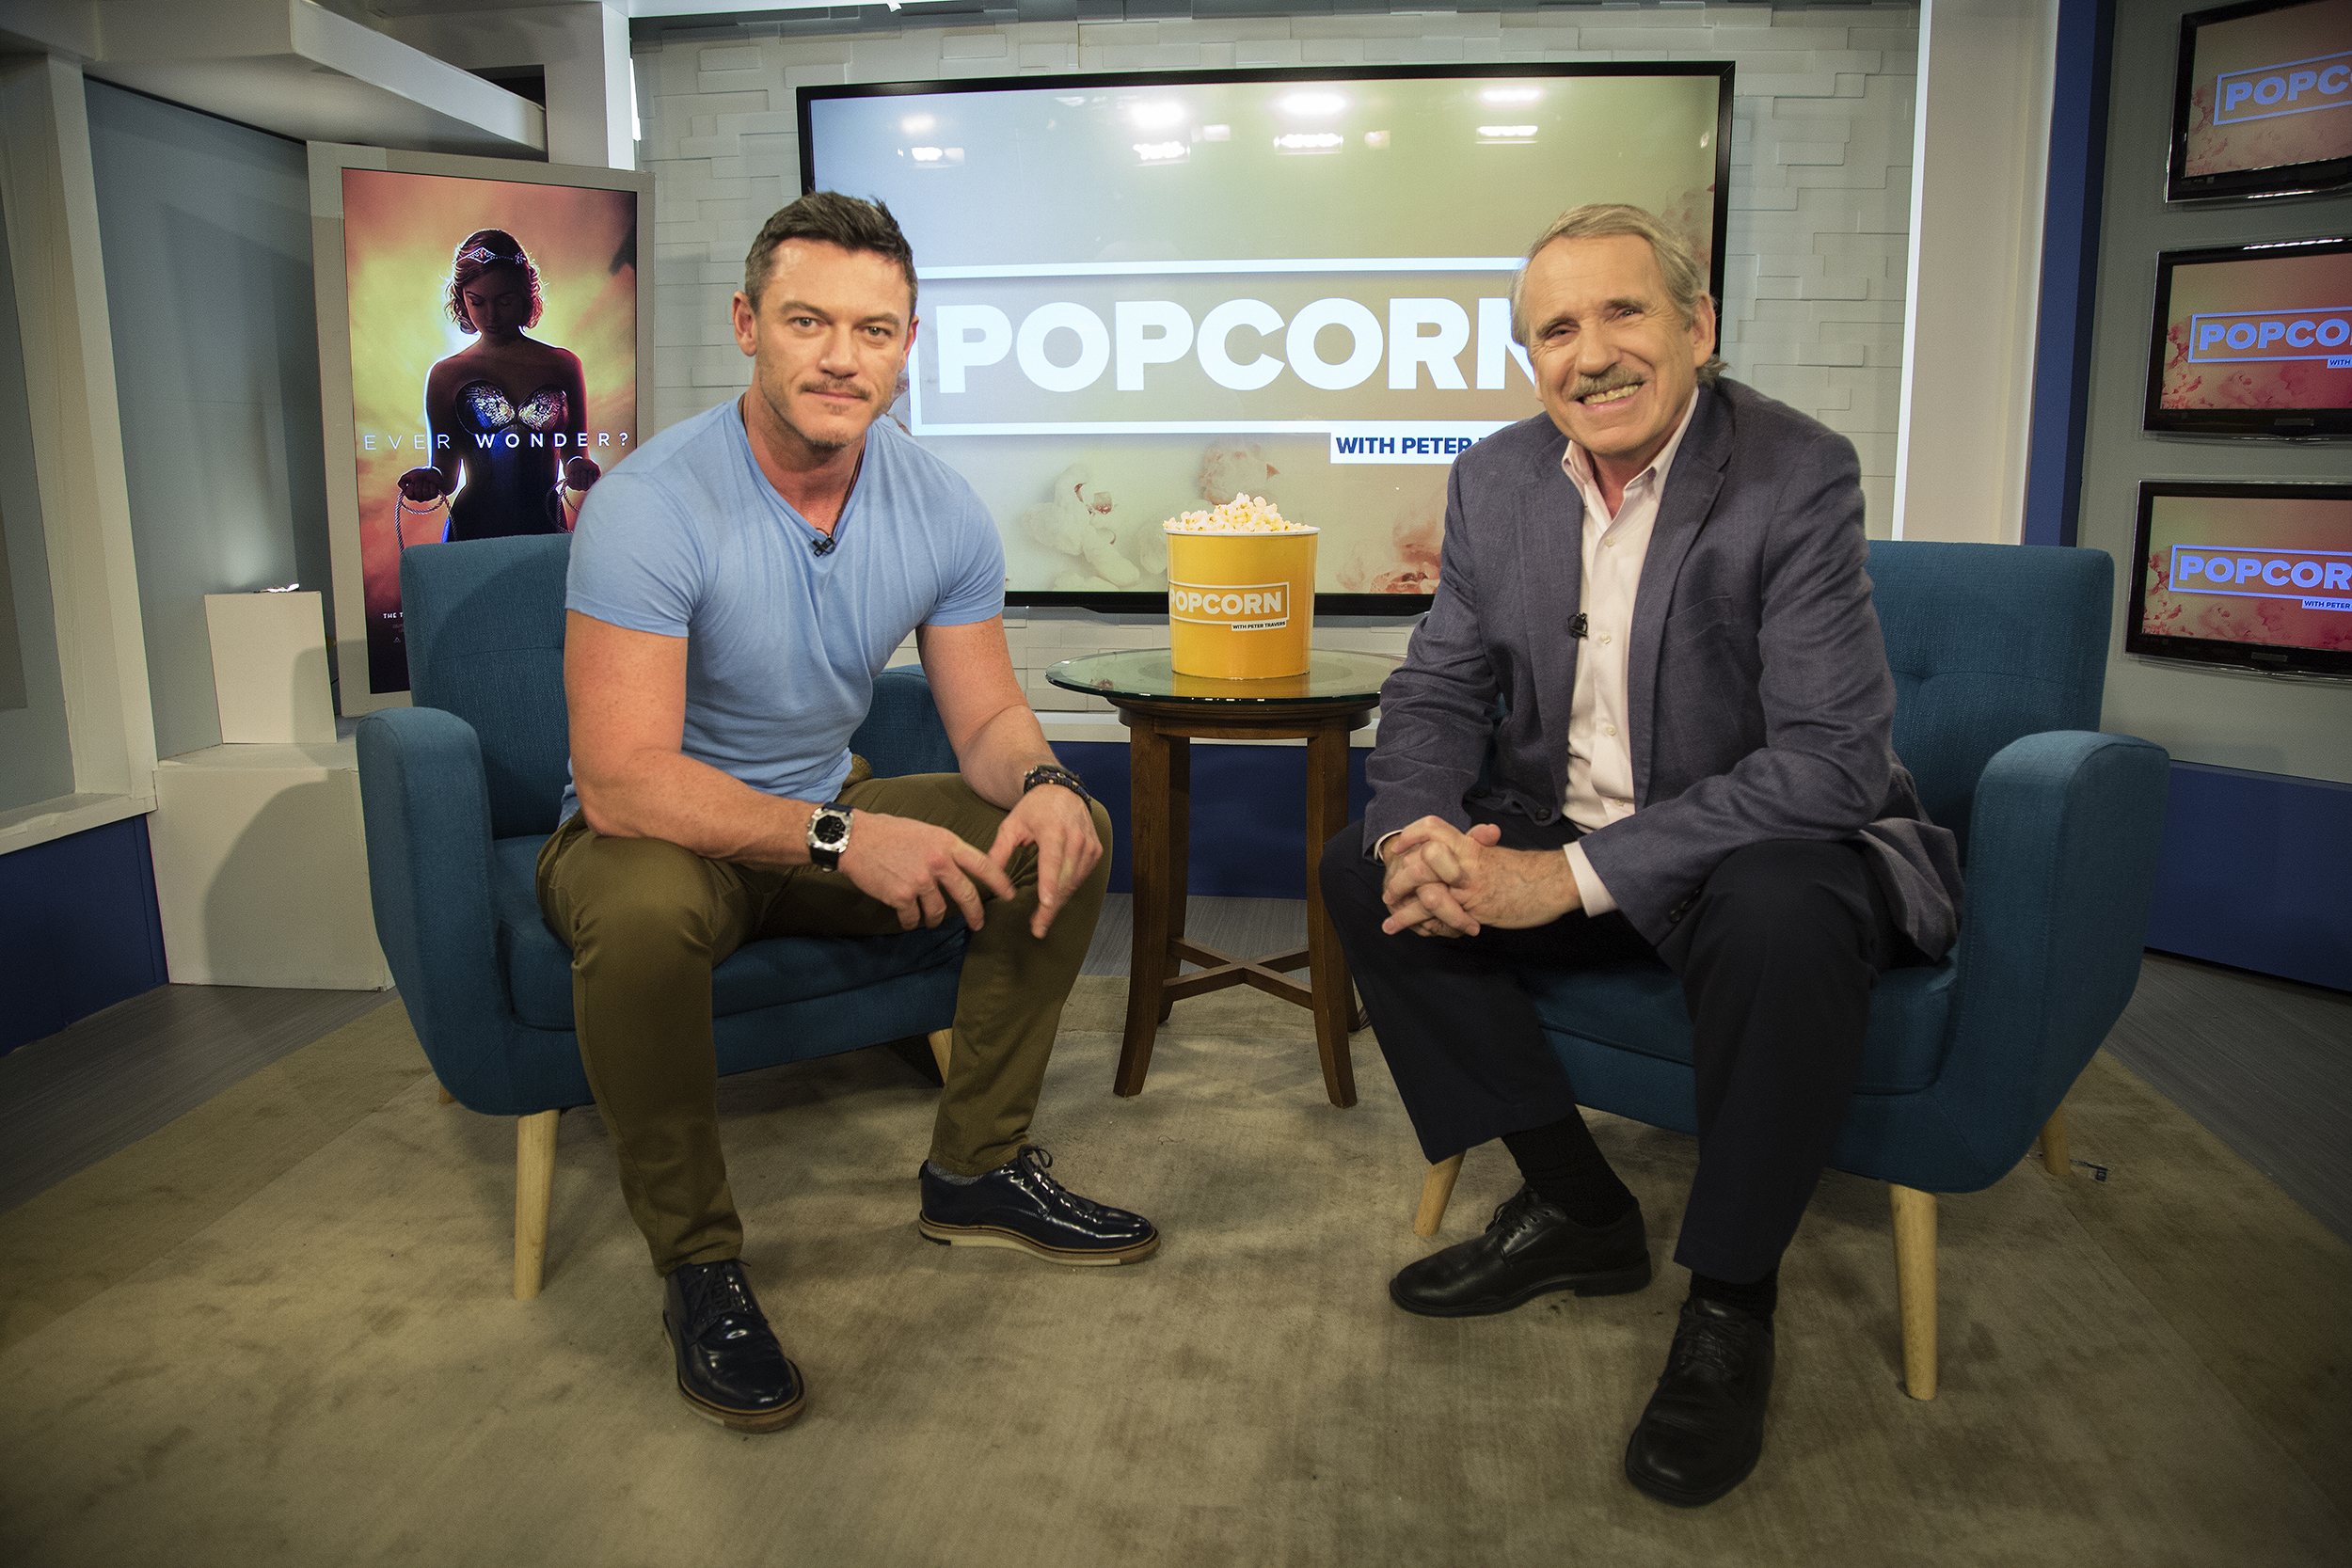 PHOTO: Luke Evans appears on "Popcorn with Peter Travers" at ABC News studios, Oct. 10, 2017, in New York City.